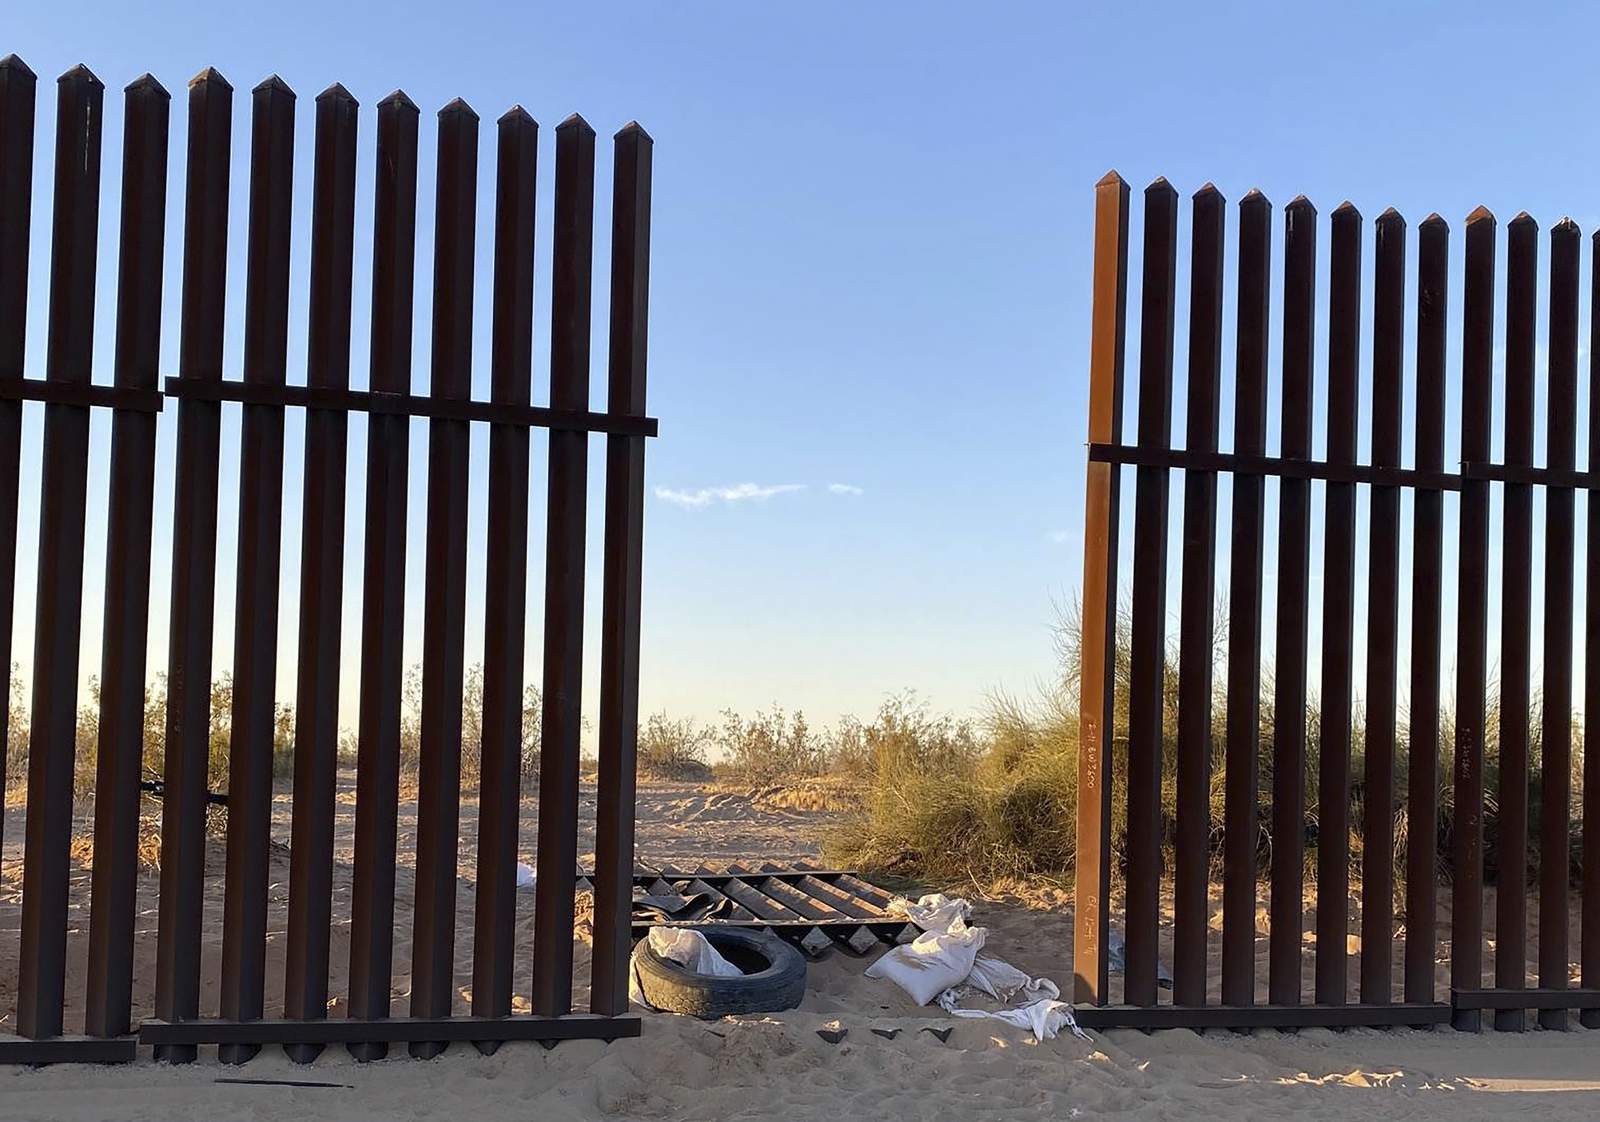 California crash that killed 13 people happened on route for illegal border crossings